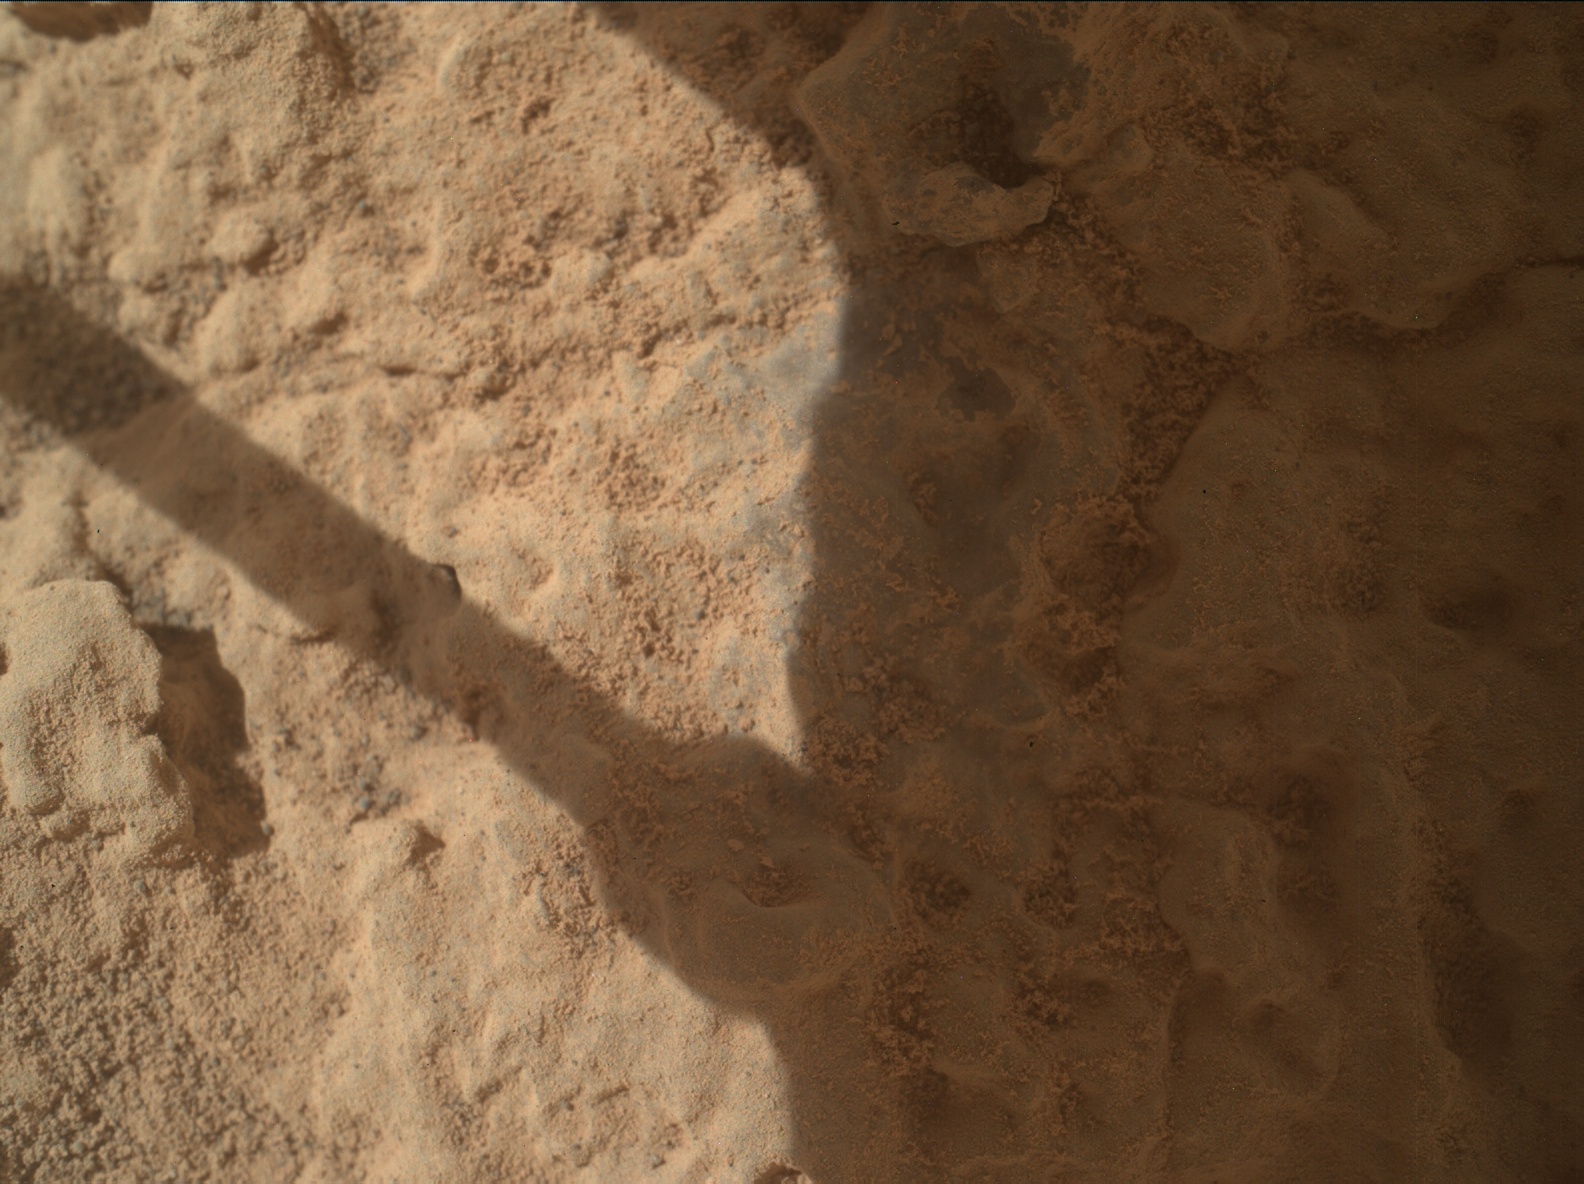 Nasa's Mars rover Curiosity acquired this image using its Mars Hand Lens Imager (MAHLI) on Sol 3684